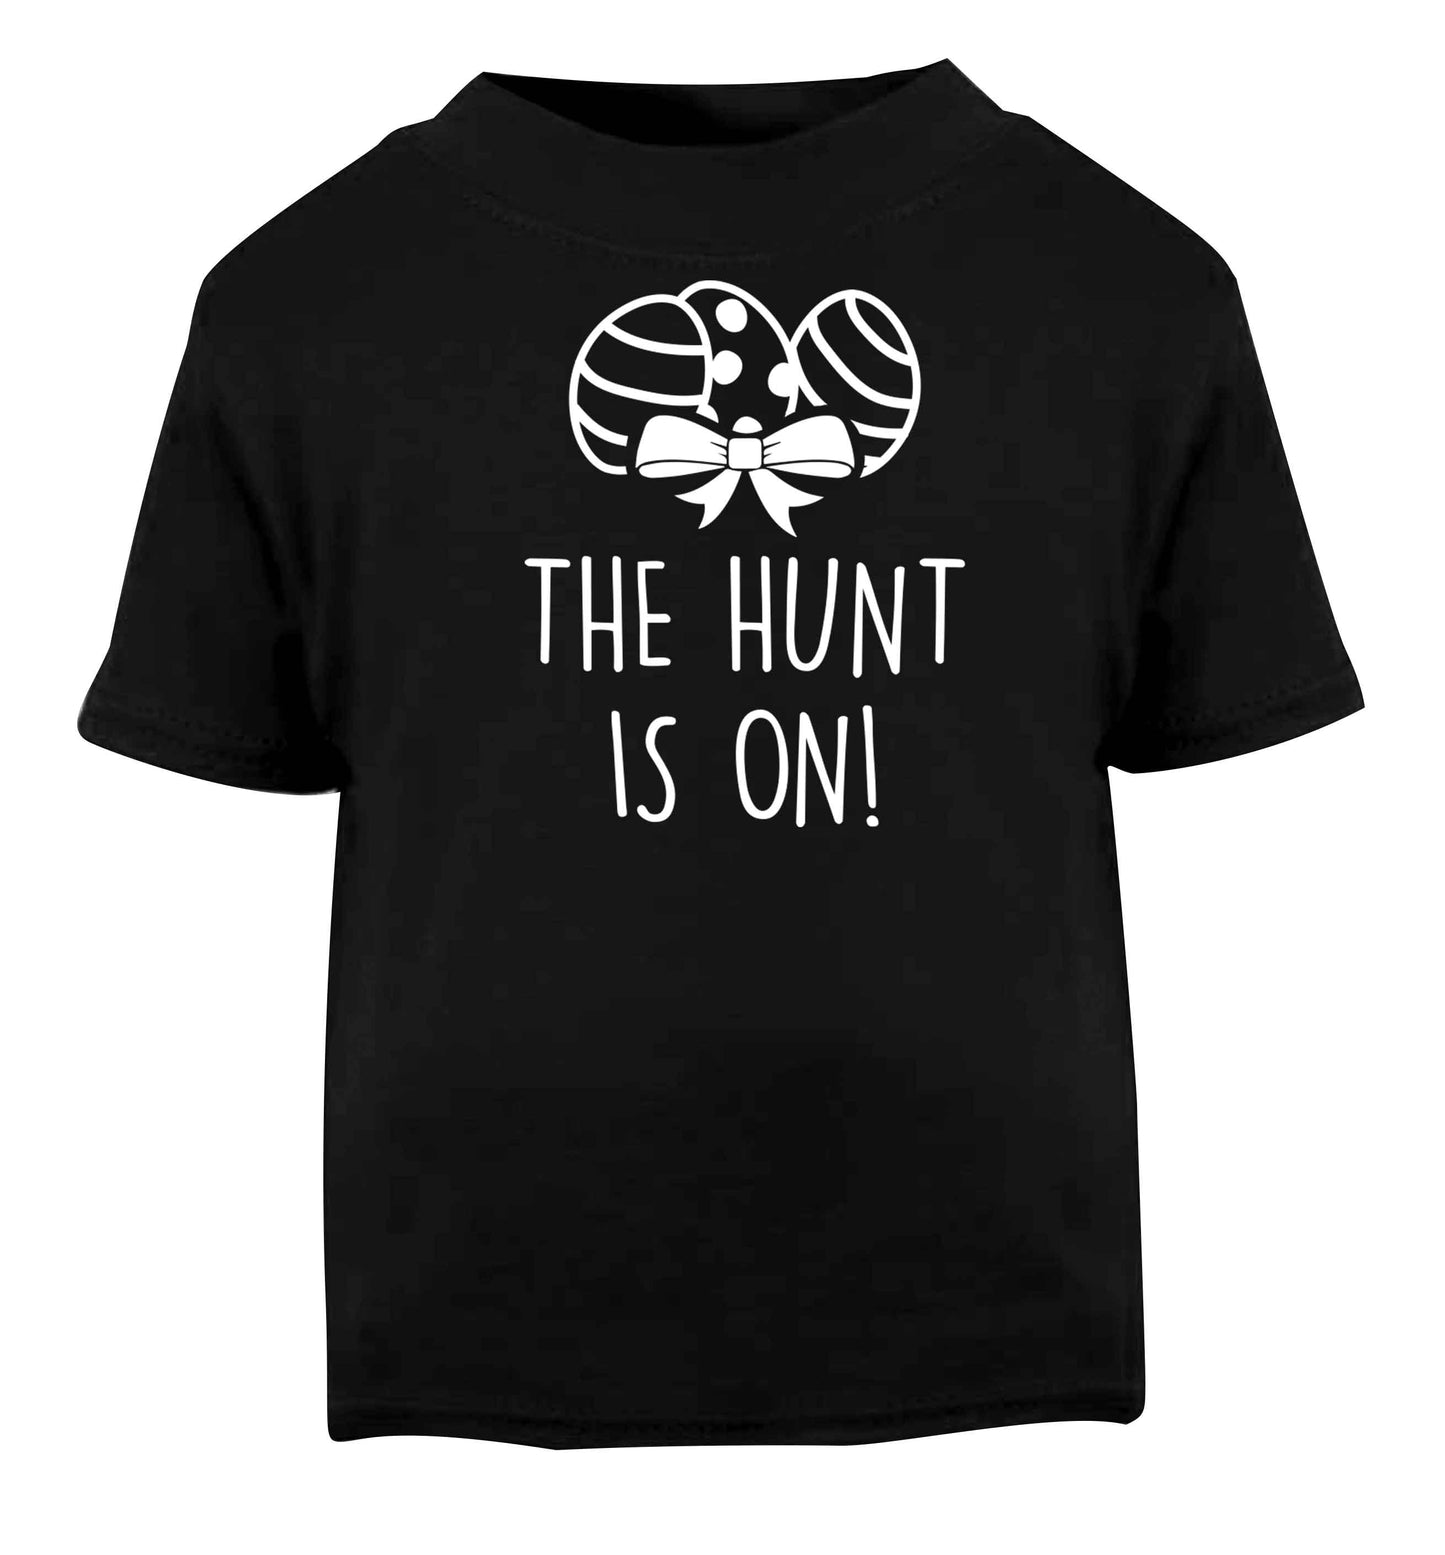 The hunt is on Black baby toddler Tshirt 2 years